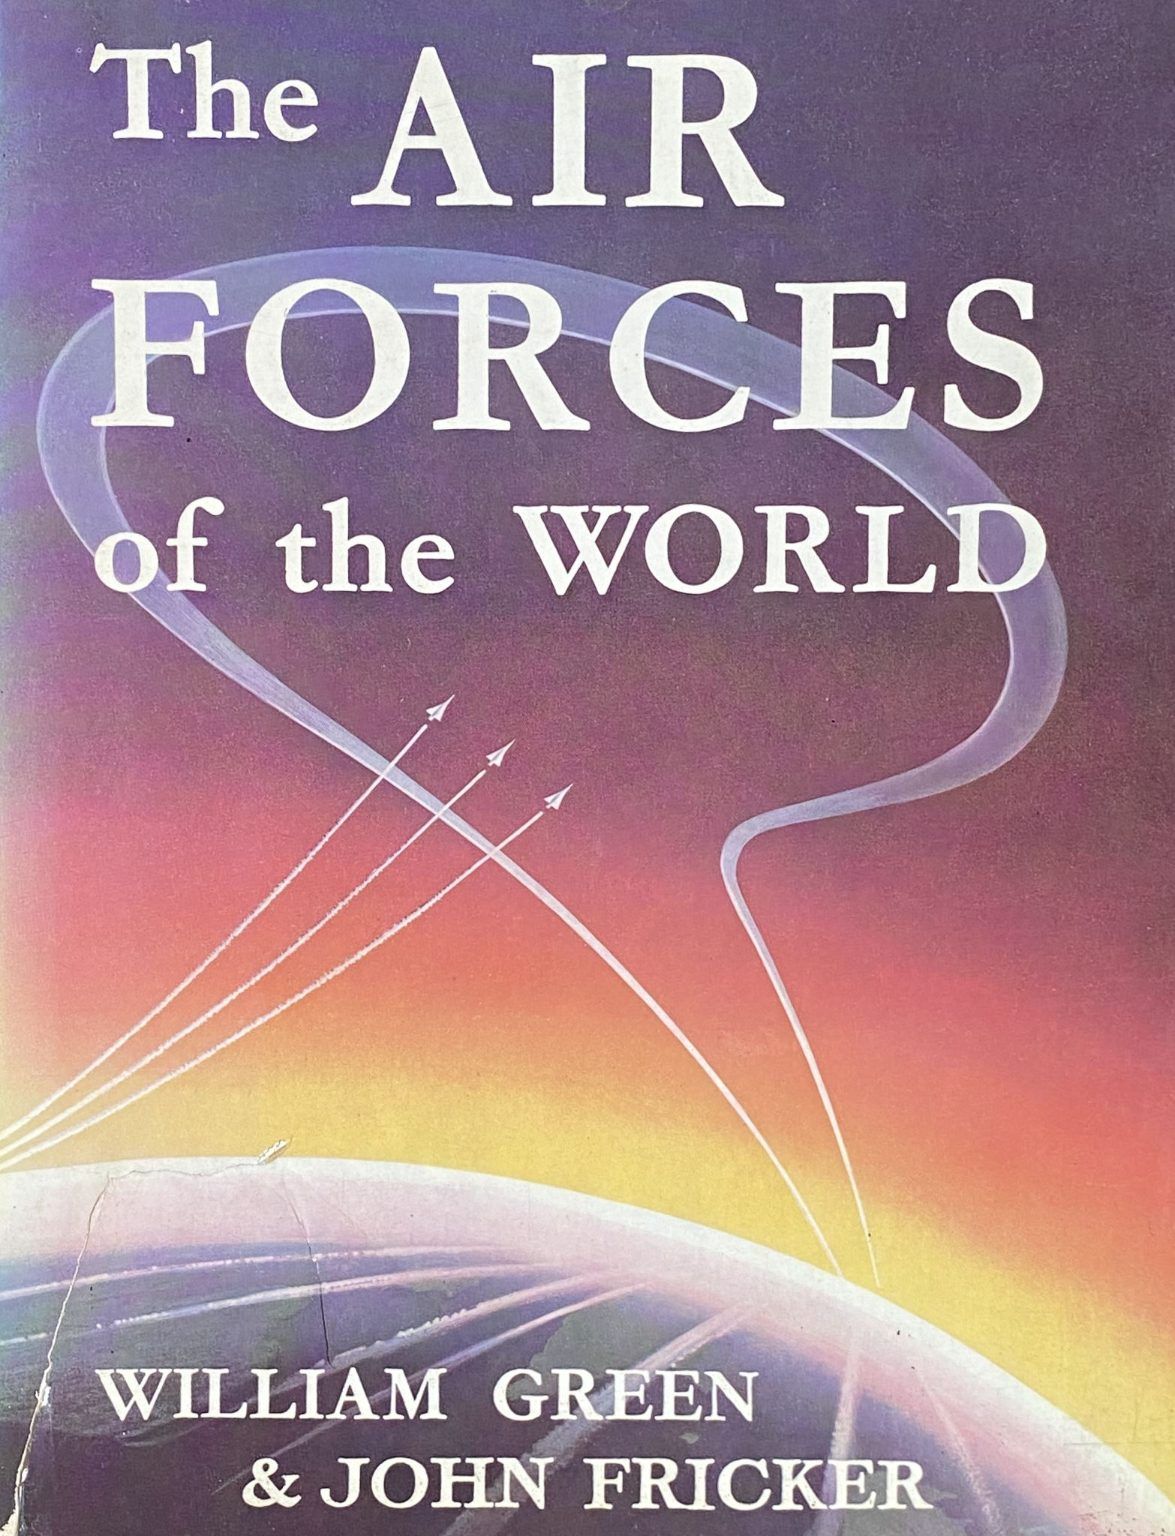 THE AIR FORCES OF THE WORLD: Their History, Development and Present Strength